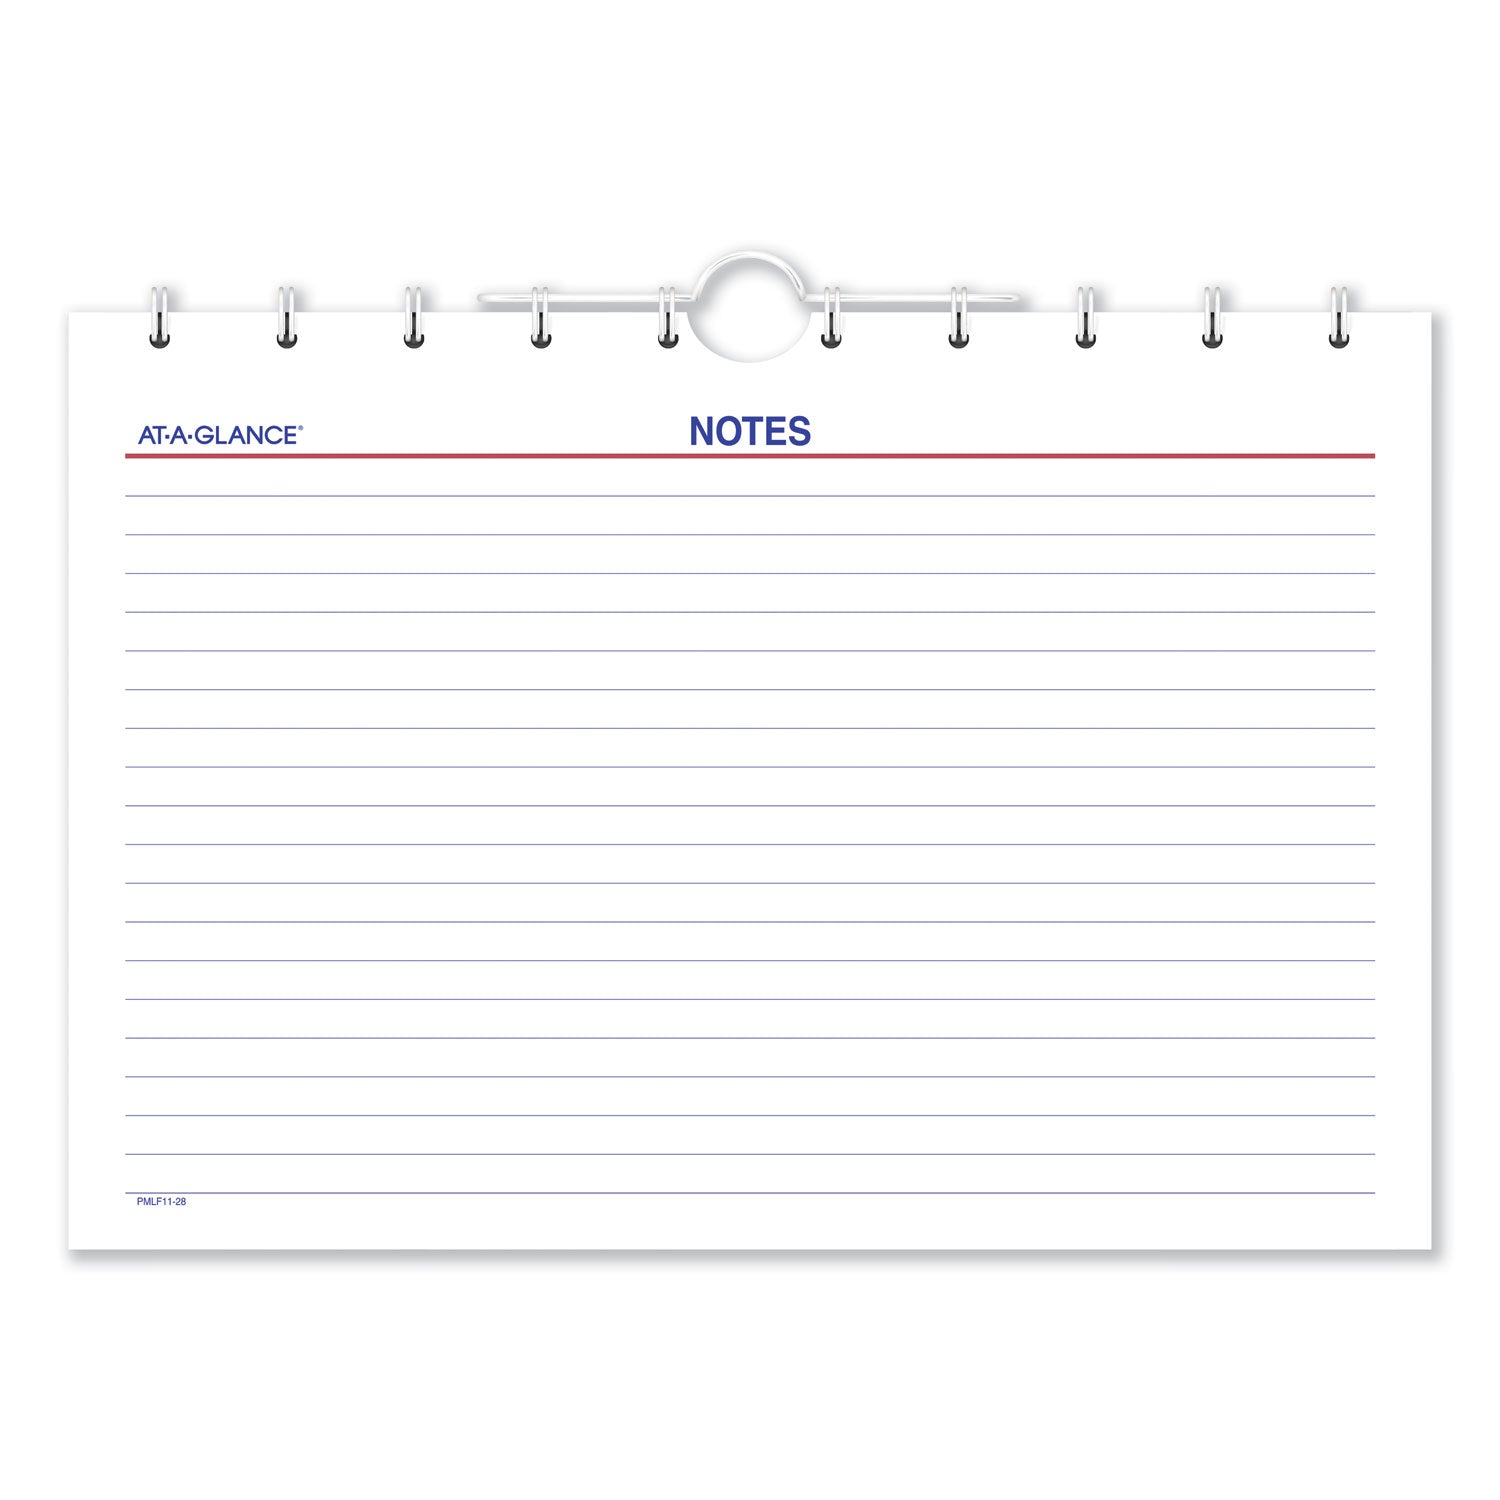 move-a-page-three-month-wall-calendar-12-x-27-white-red-blue-sheets-15-month-dec-to-feb-2023-to-2025_aagpmlf1128 - 2